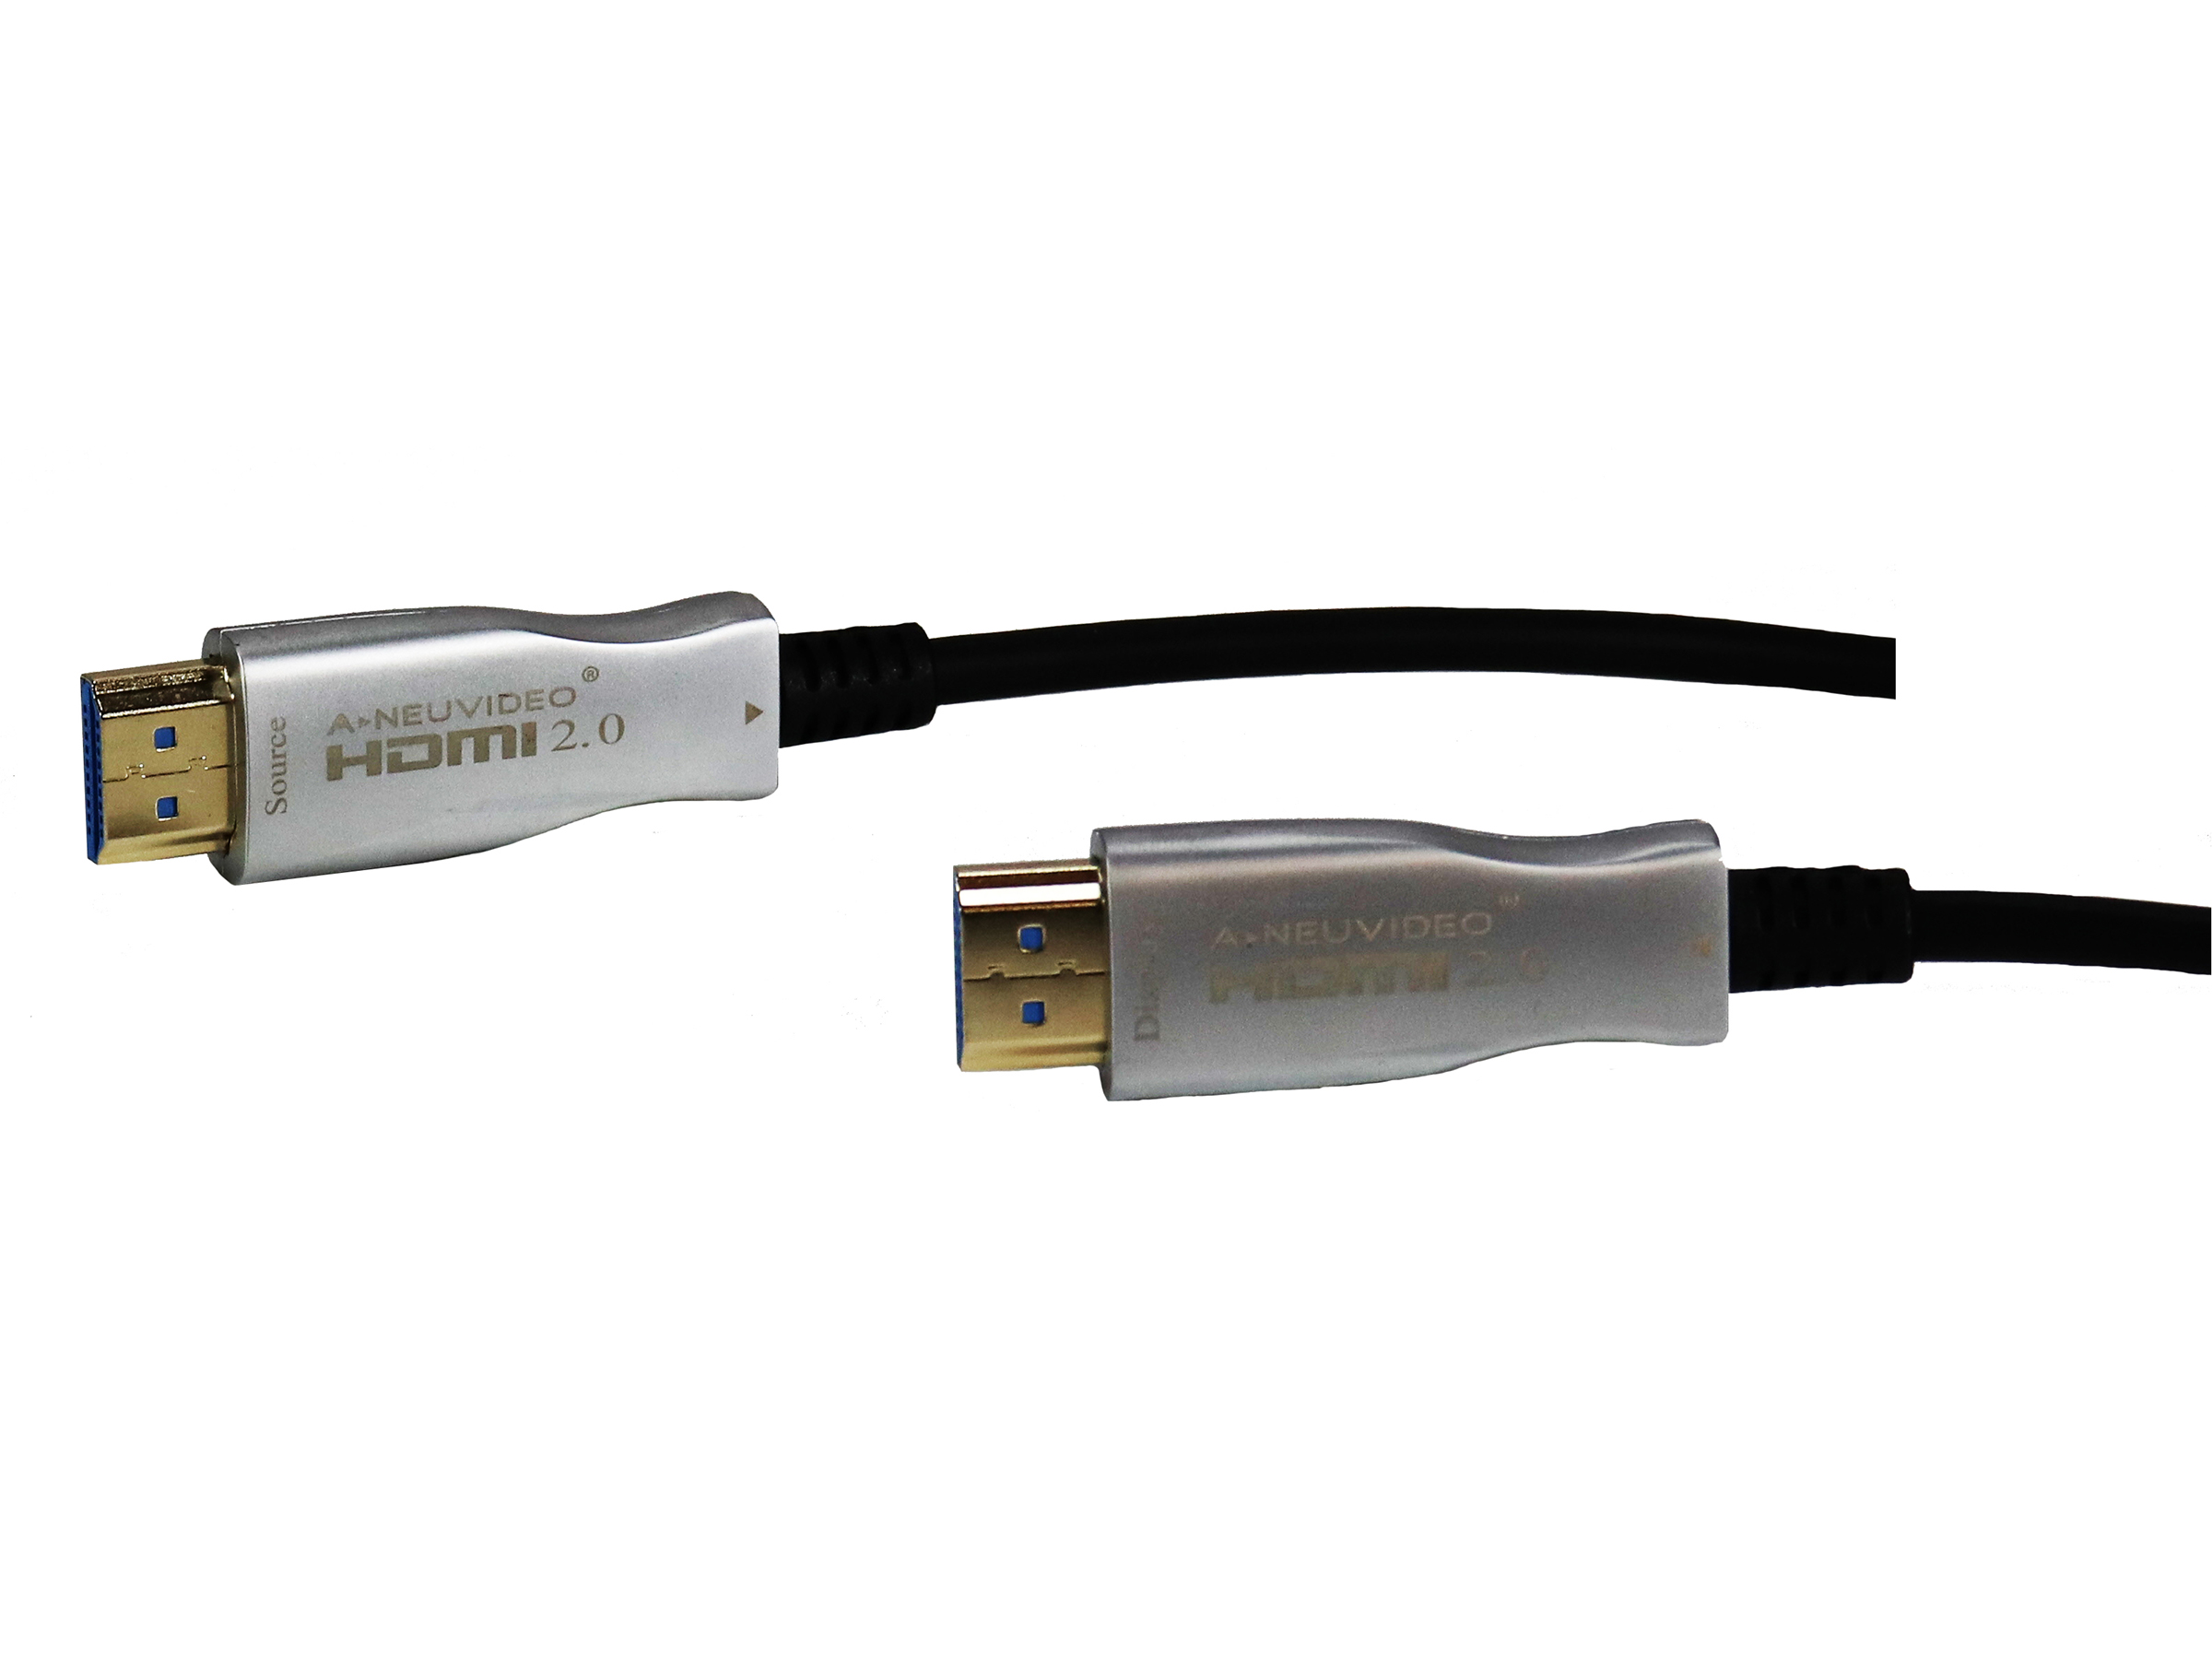 ANI-AOC-25 Fiber Optic Hdmi Active Optical Cable - 25m/82ft by A-NeuVideo